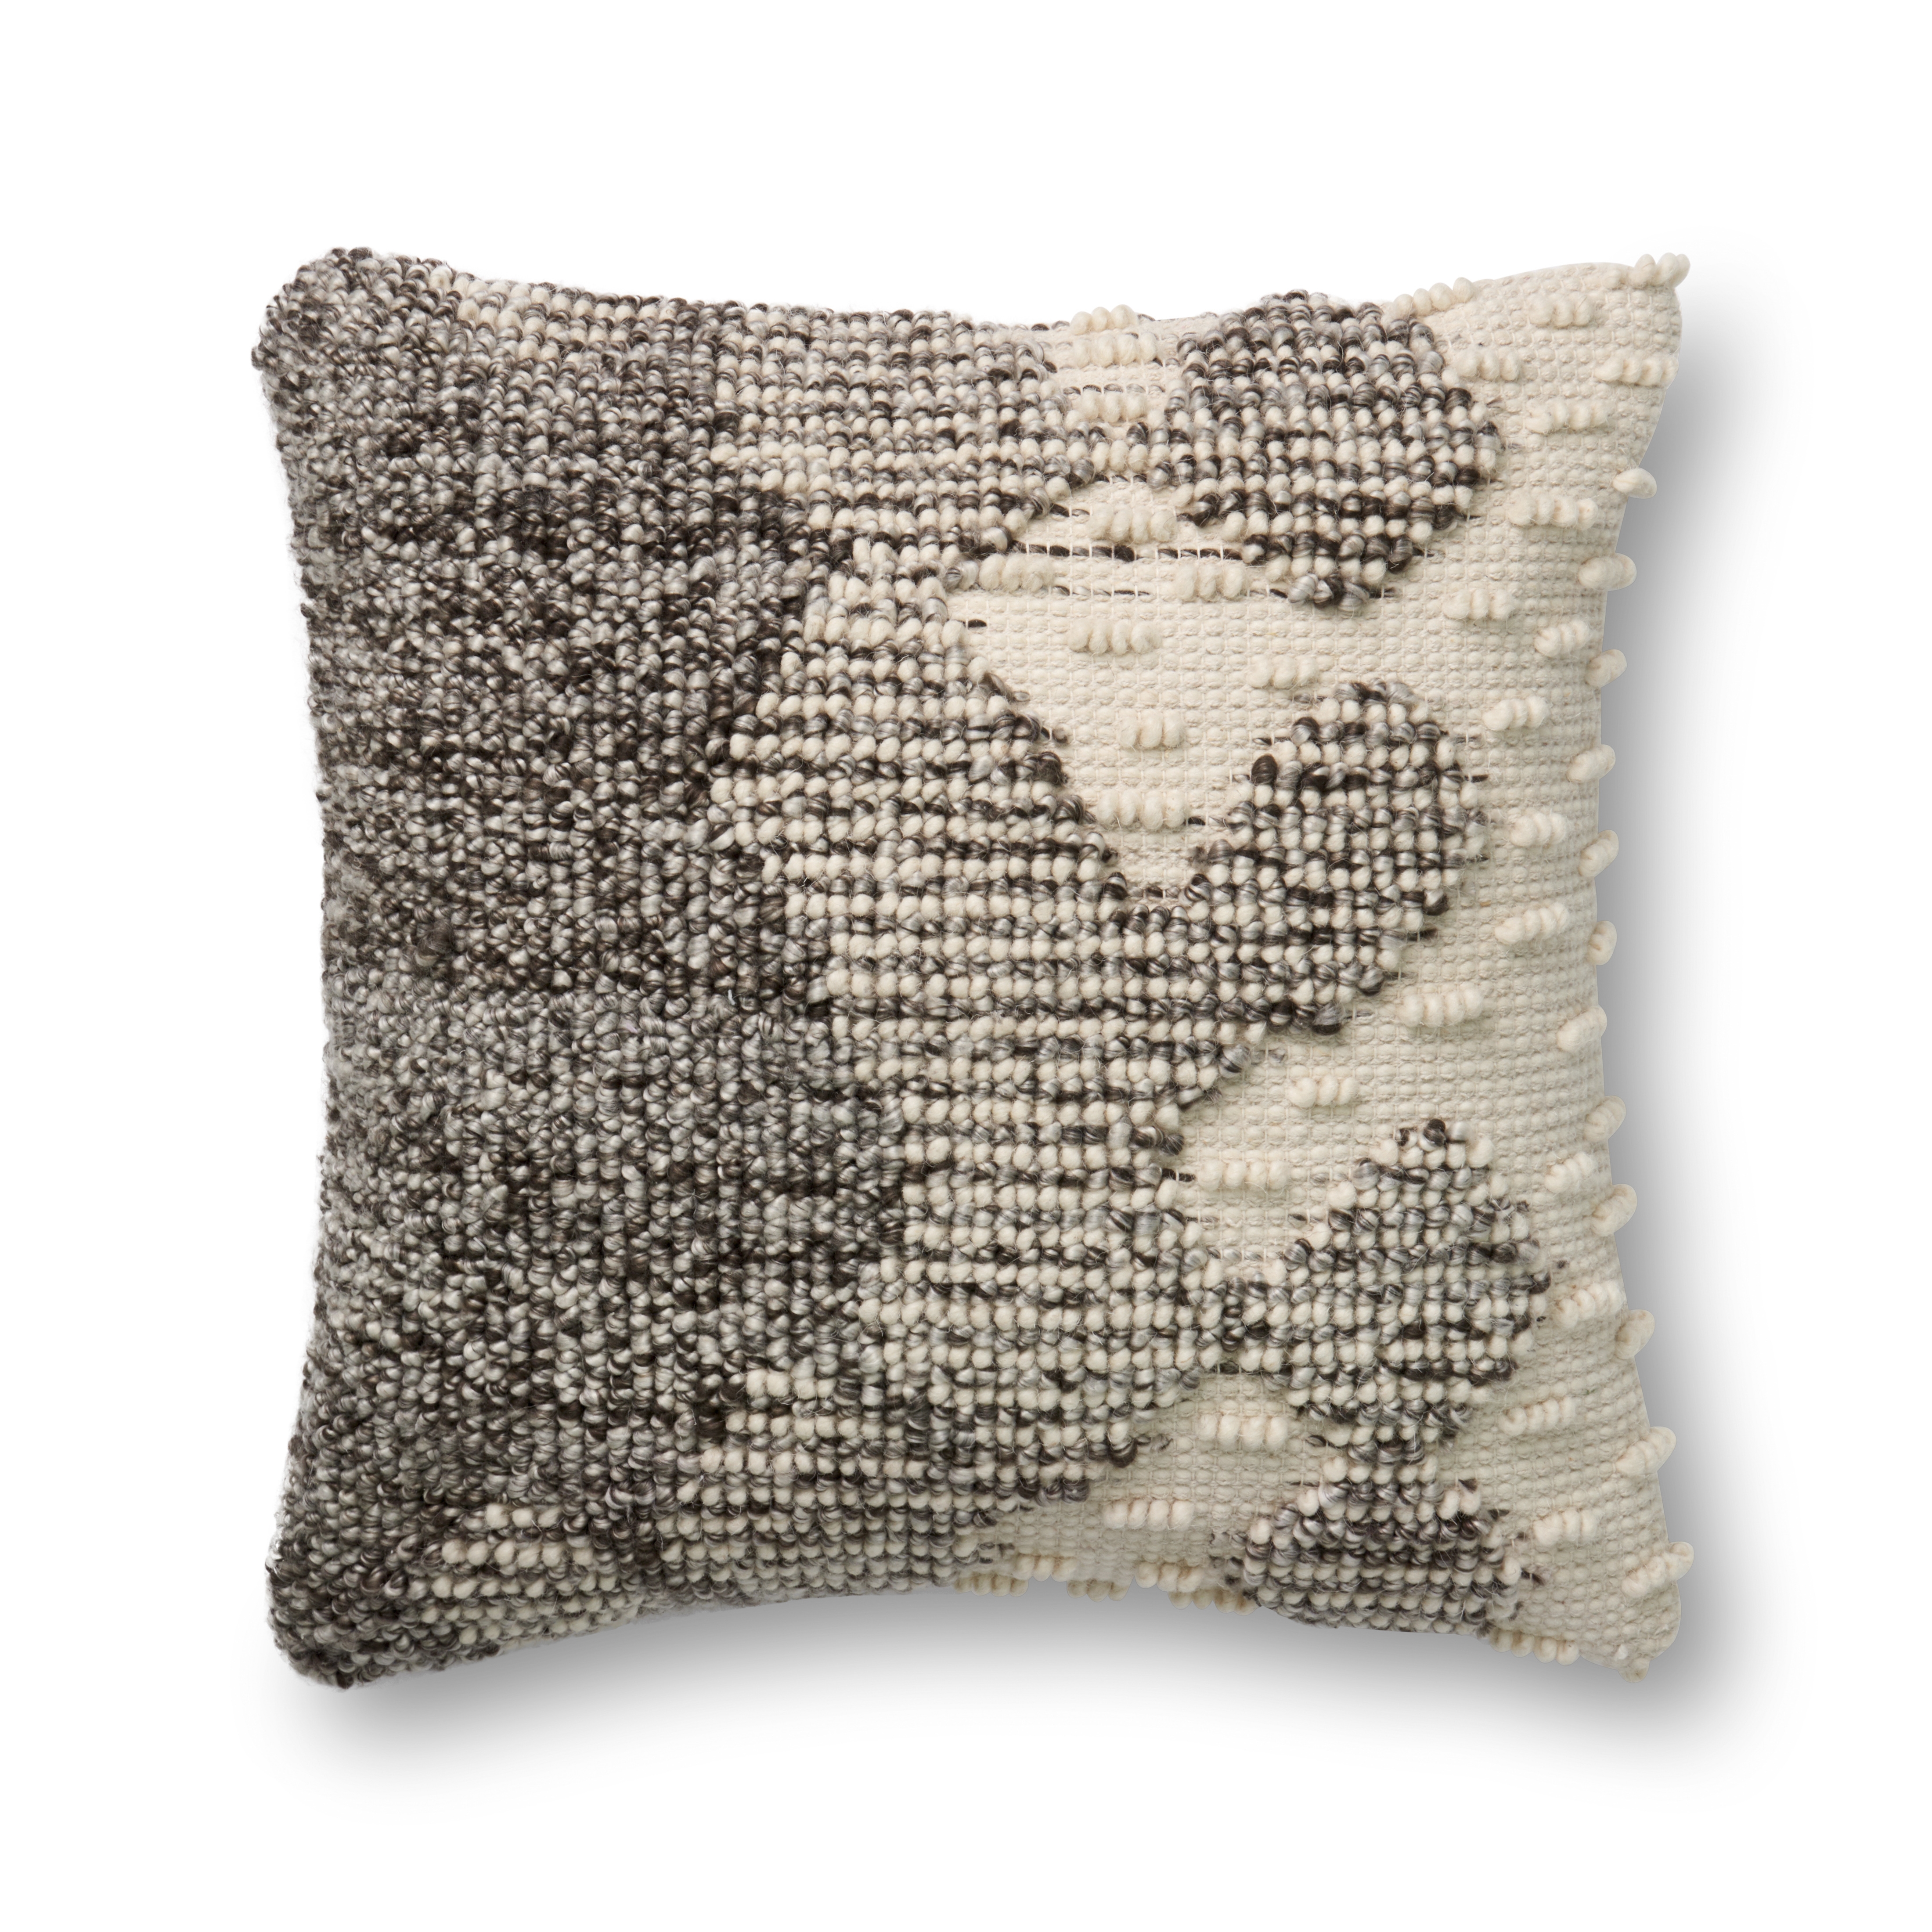 ED Ellen DeGeneres Crafted by Loloi PILLOWS P4002 GREY / IVORY 22" x 22" Cover Only - Image 0